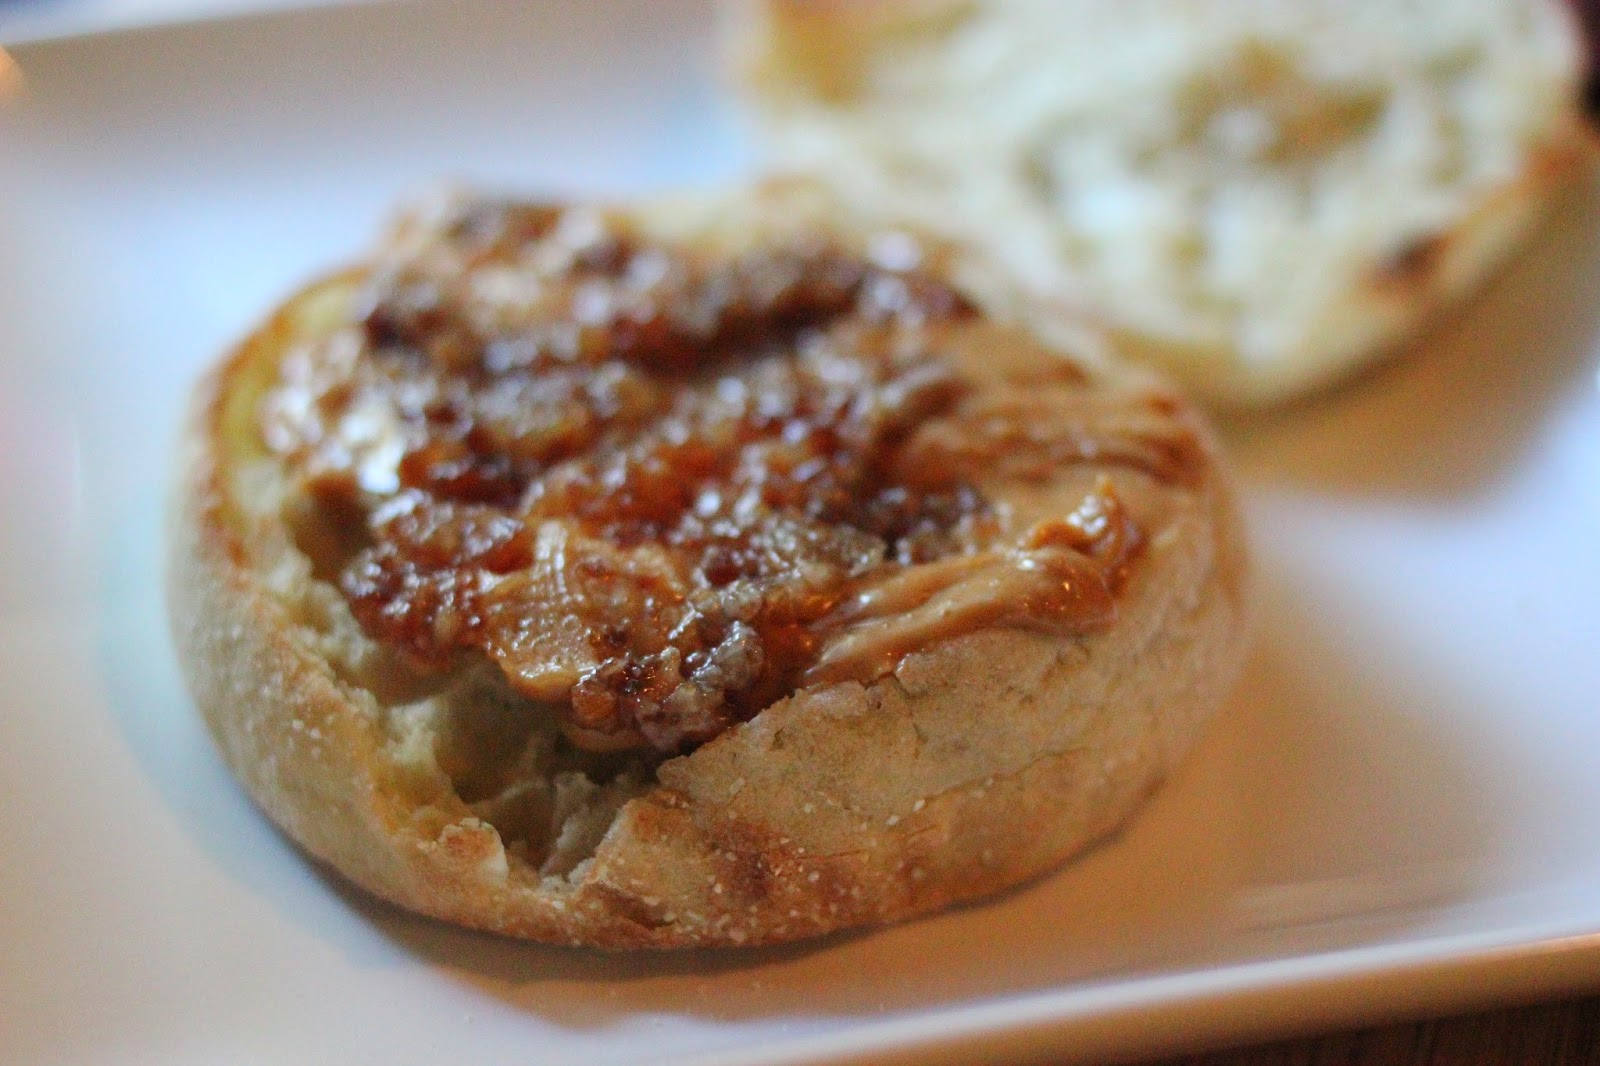 The Elvis Breakfast Sandwich with bacon jam.  It consists of peanut butter, spreadable bacon, and bananas on an English muffin.    Bacon Jams review.